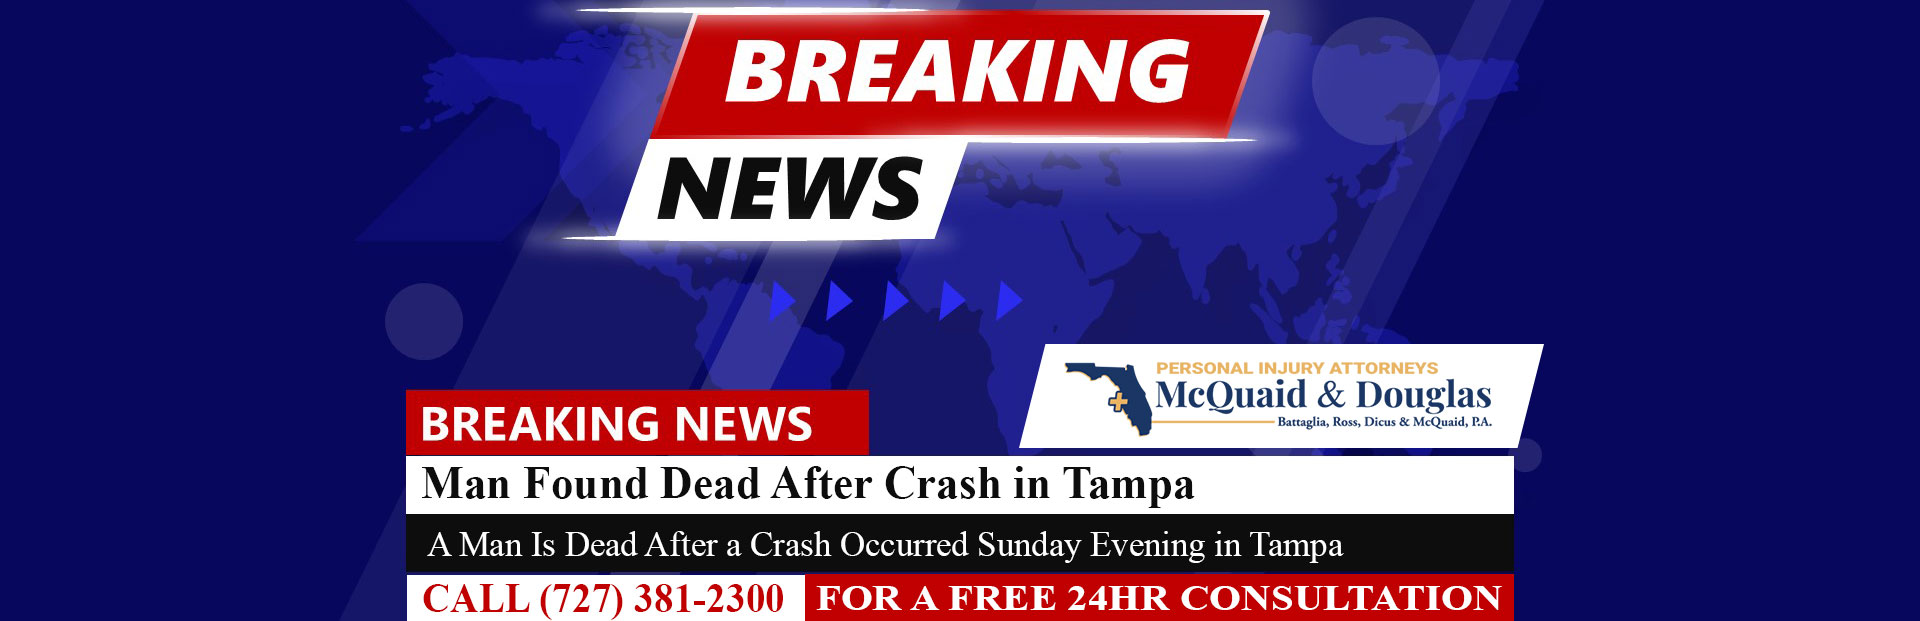 [12-04-23] Man Found Dead After Crash in Tampa